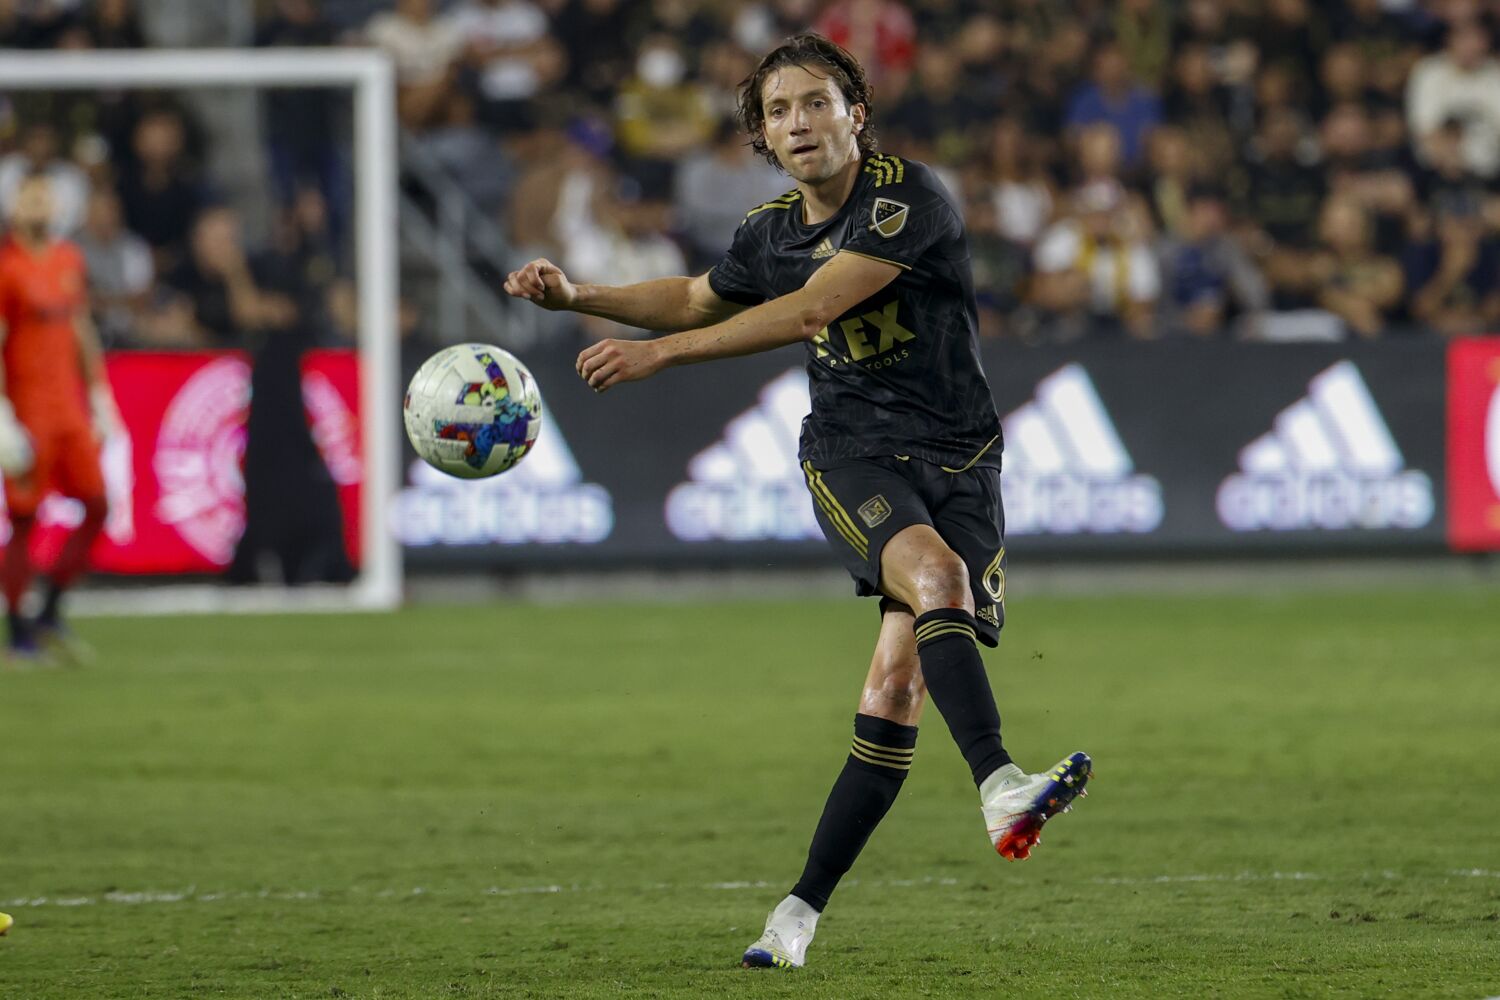 Ilie Sánchez and LAFC determined to put past playoff disappointments behind them